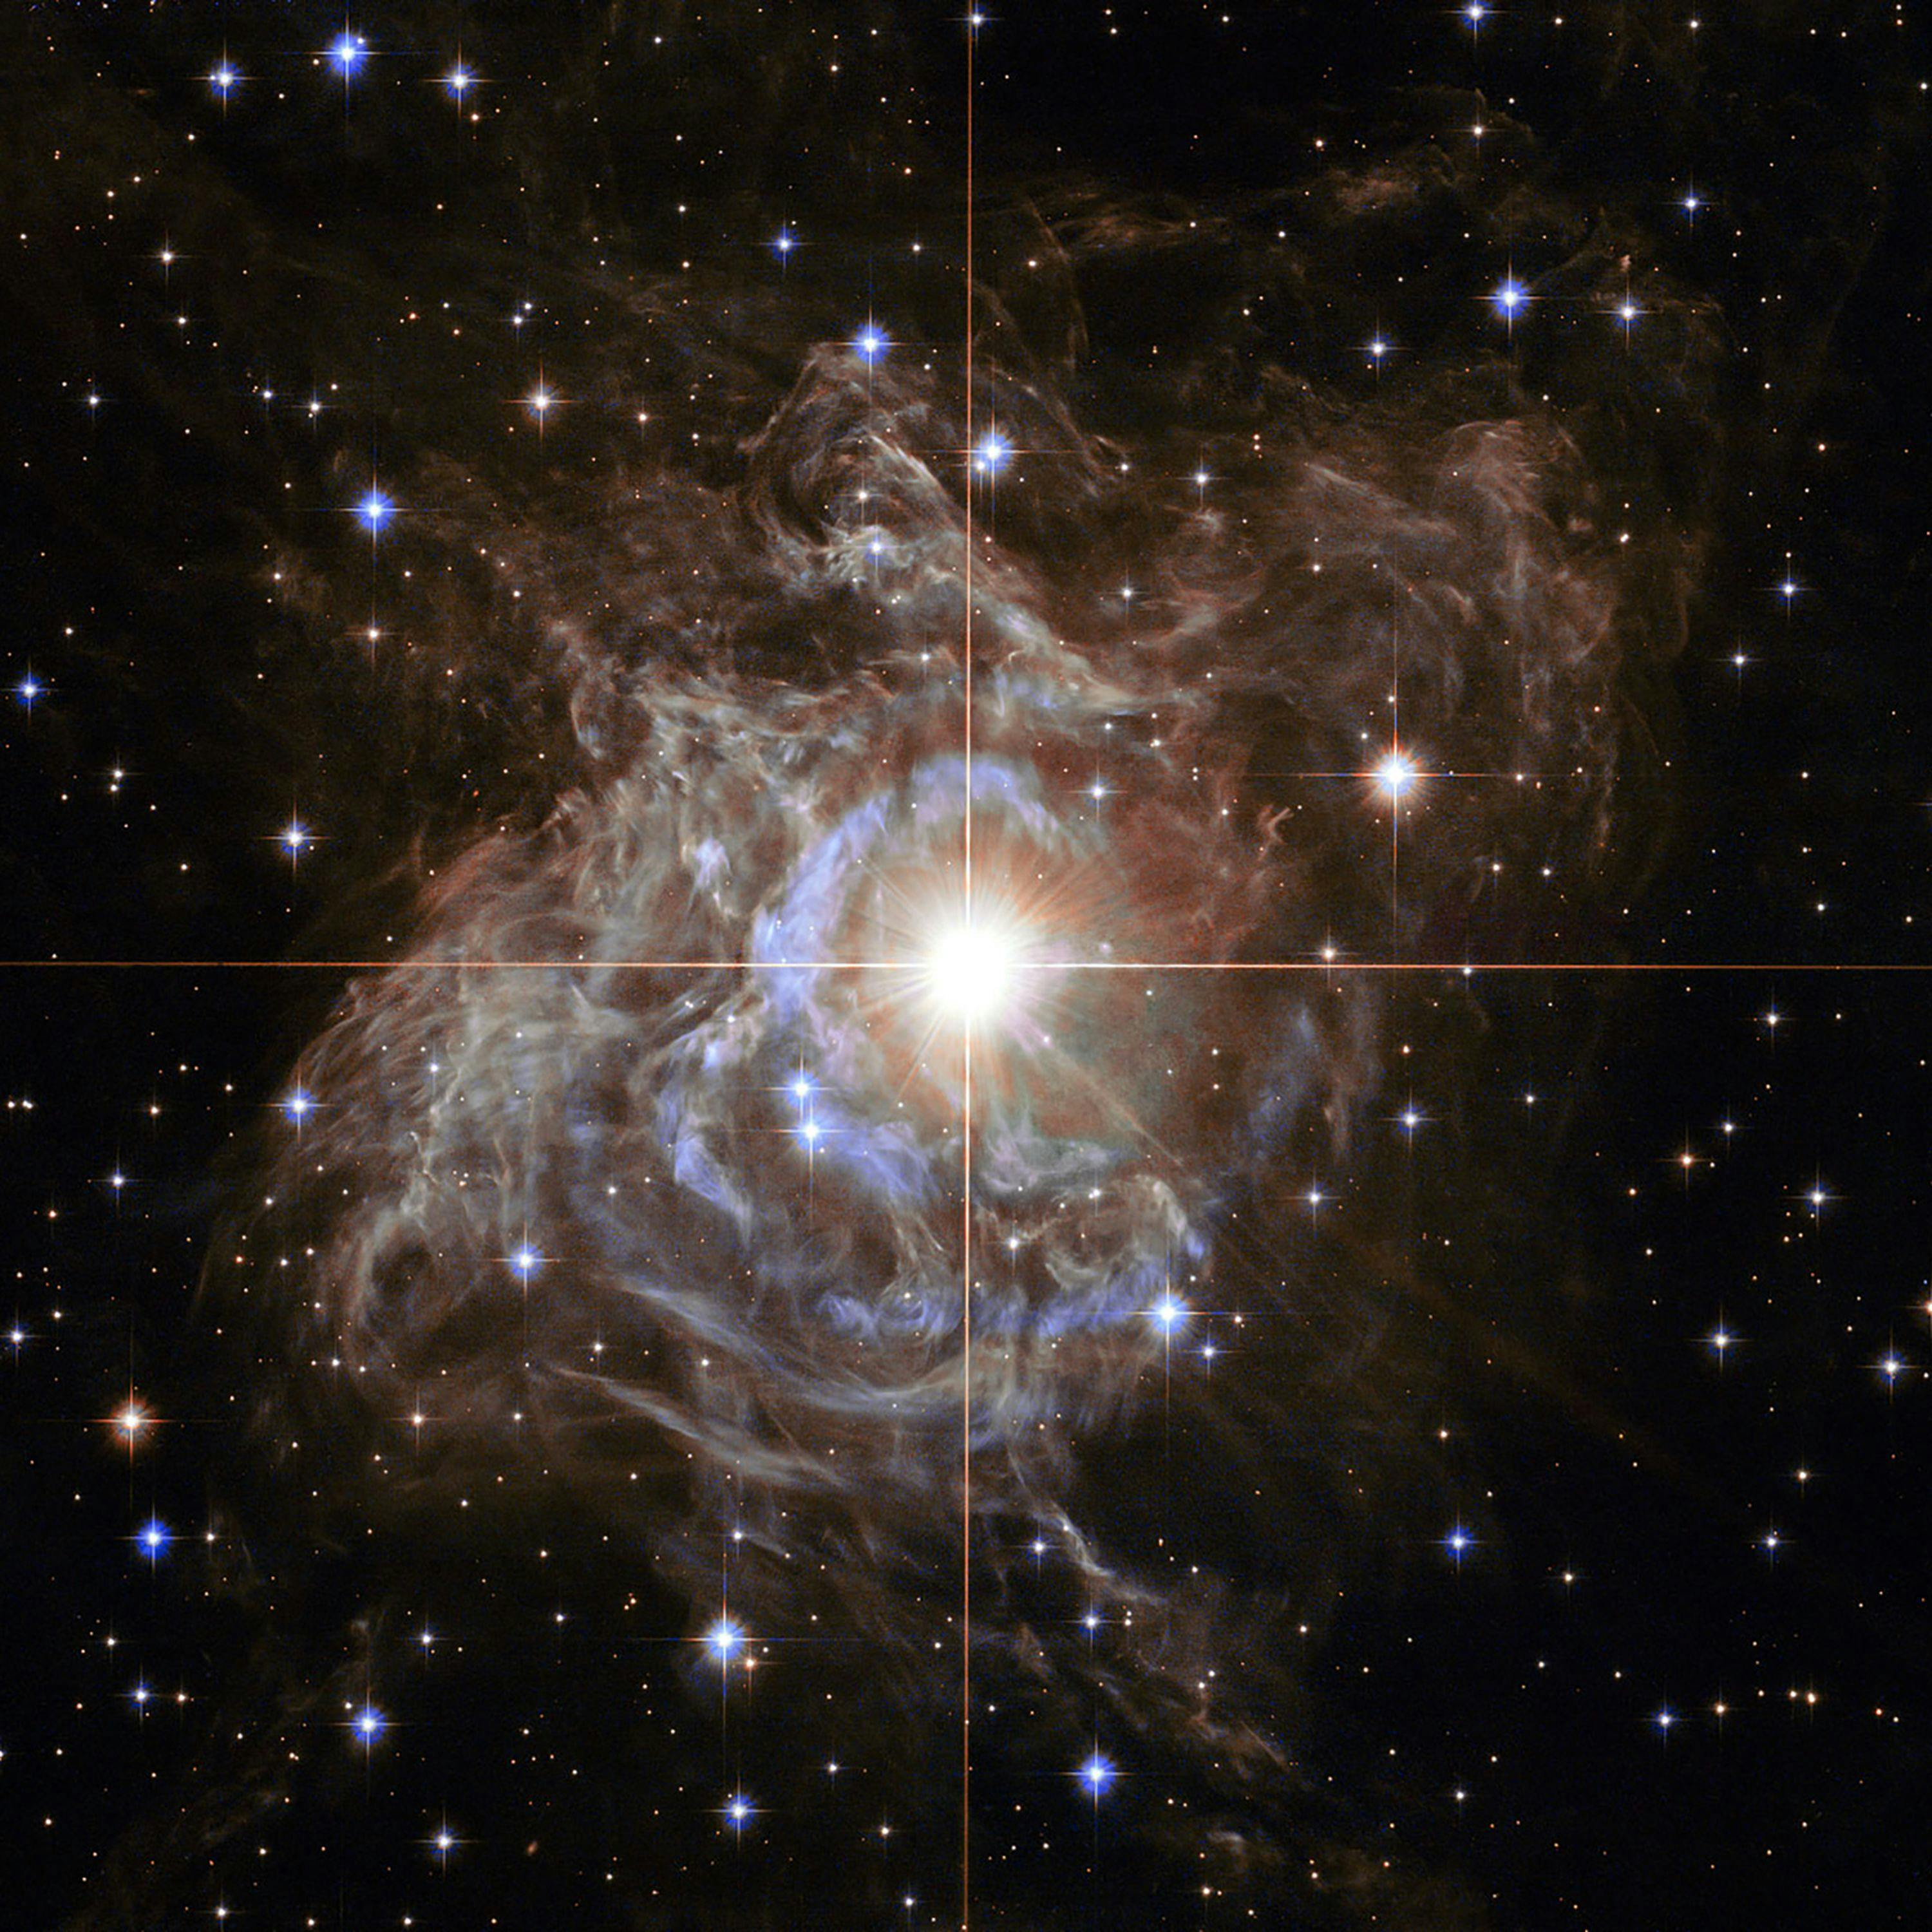 The life and death of stars